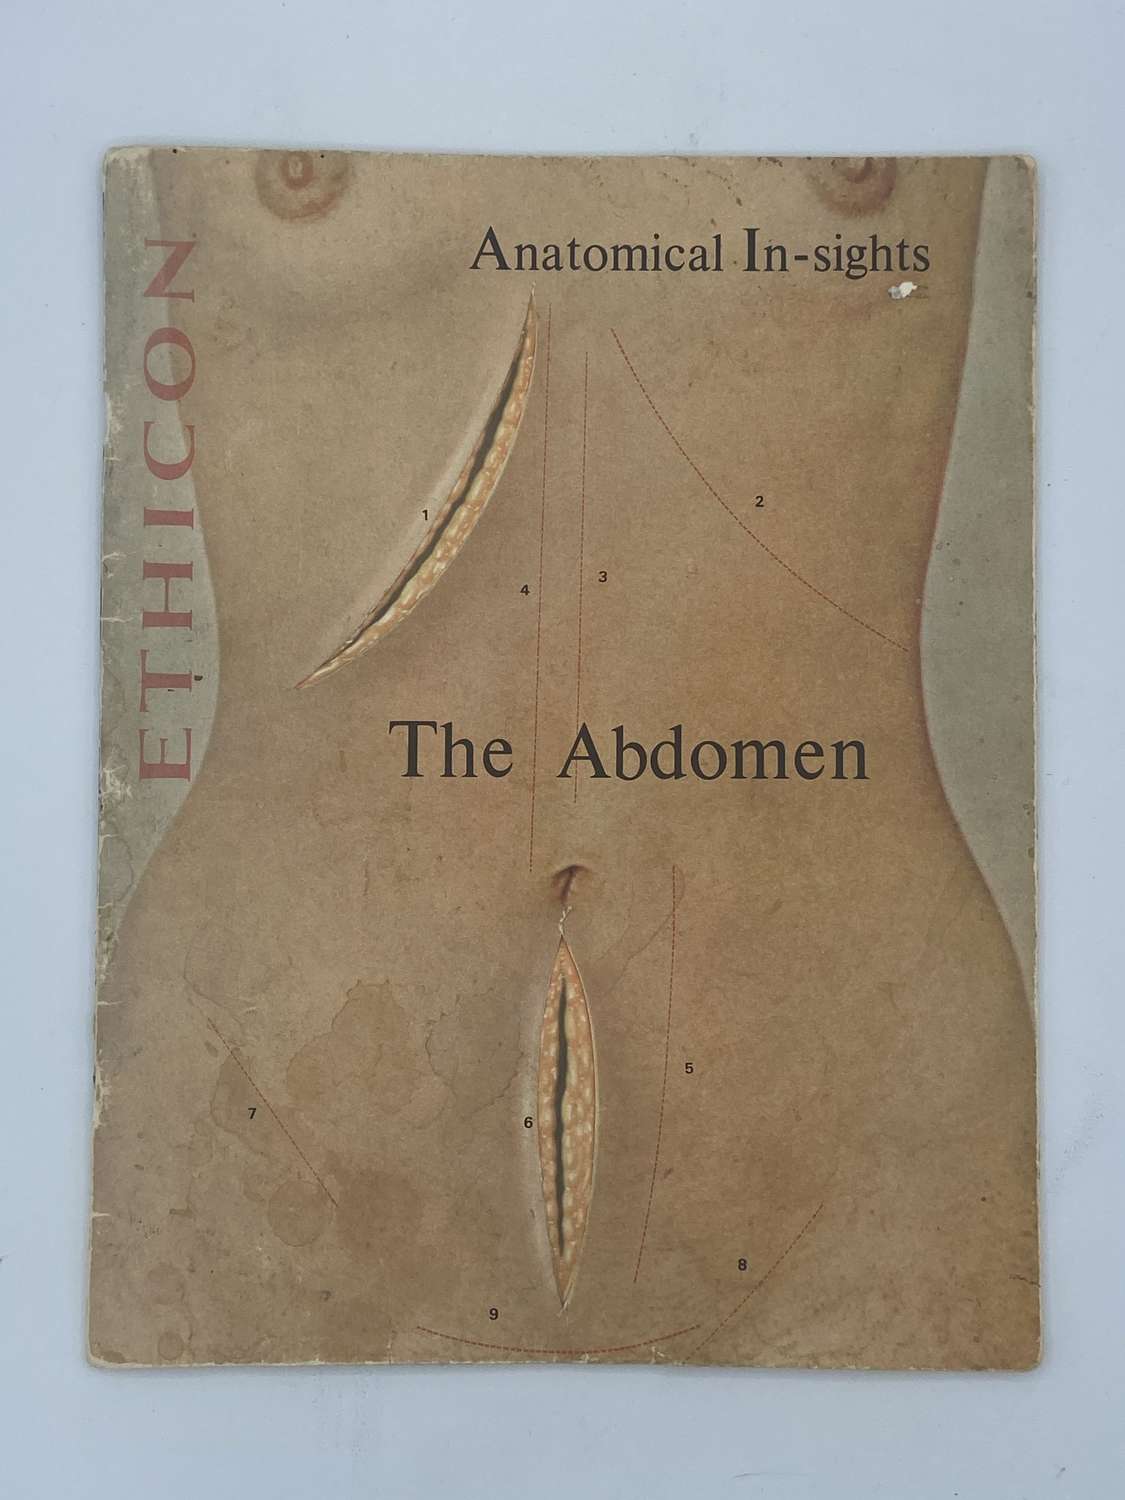 1969 Ethicon Anatomical In-sights: The Abdomen Book